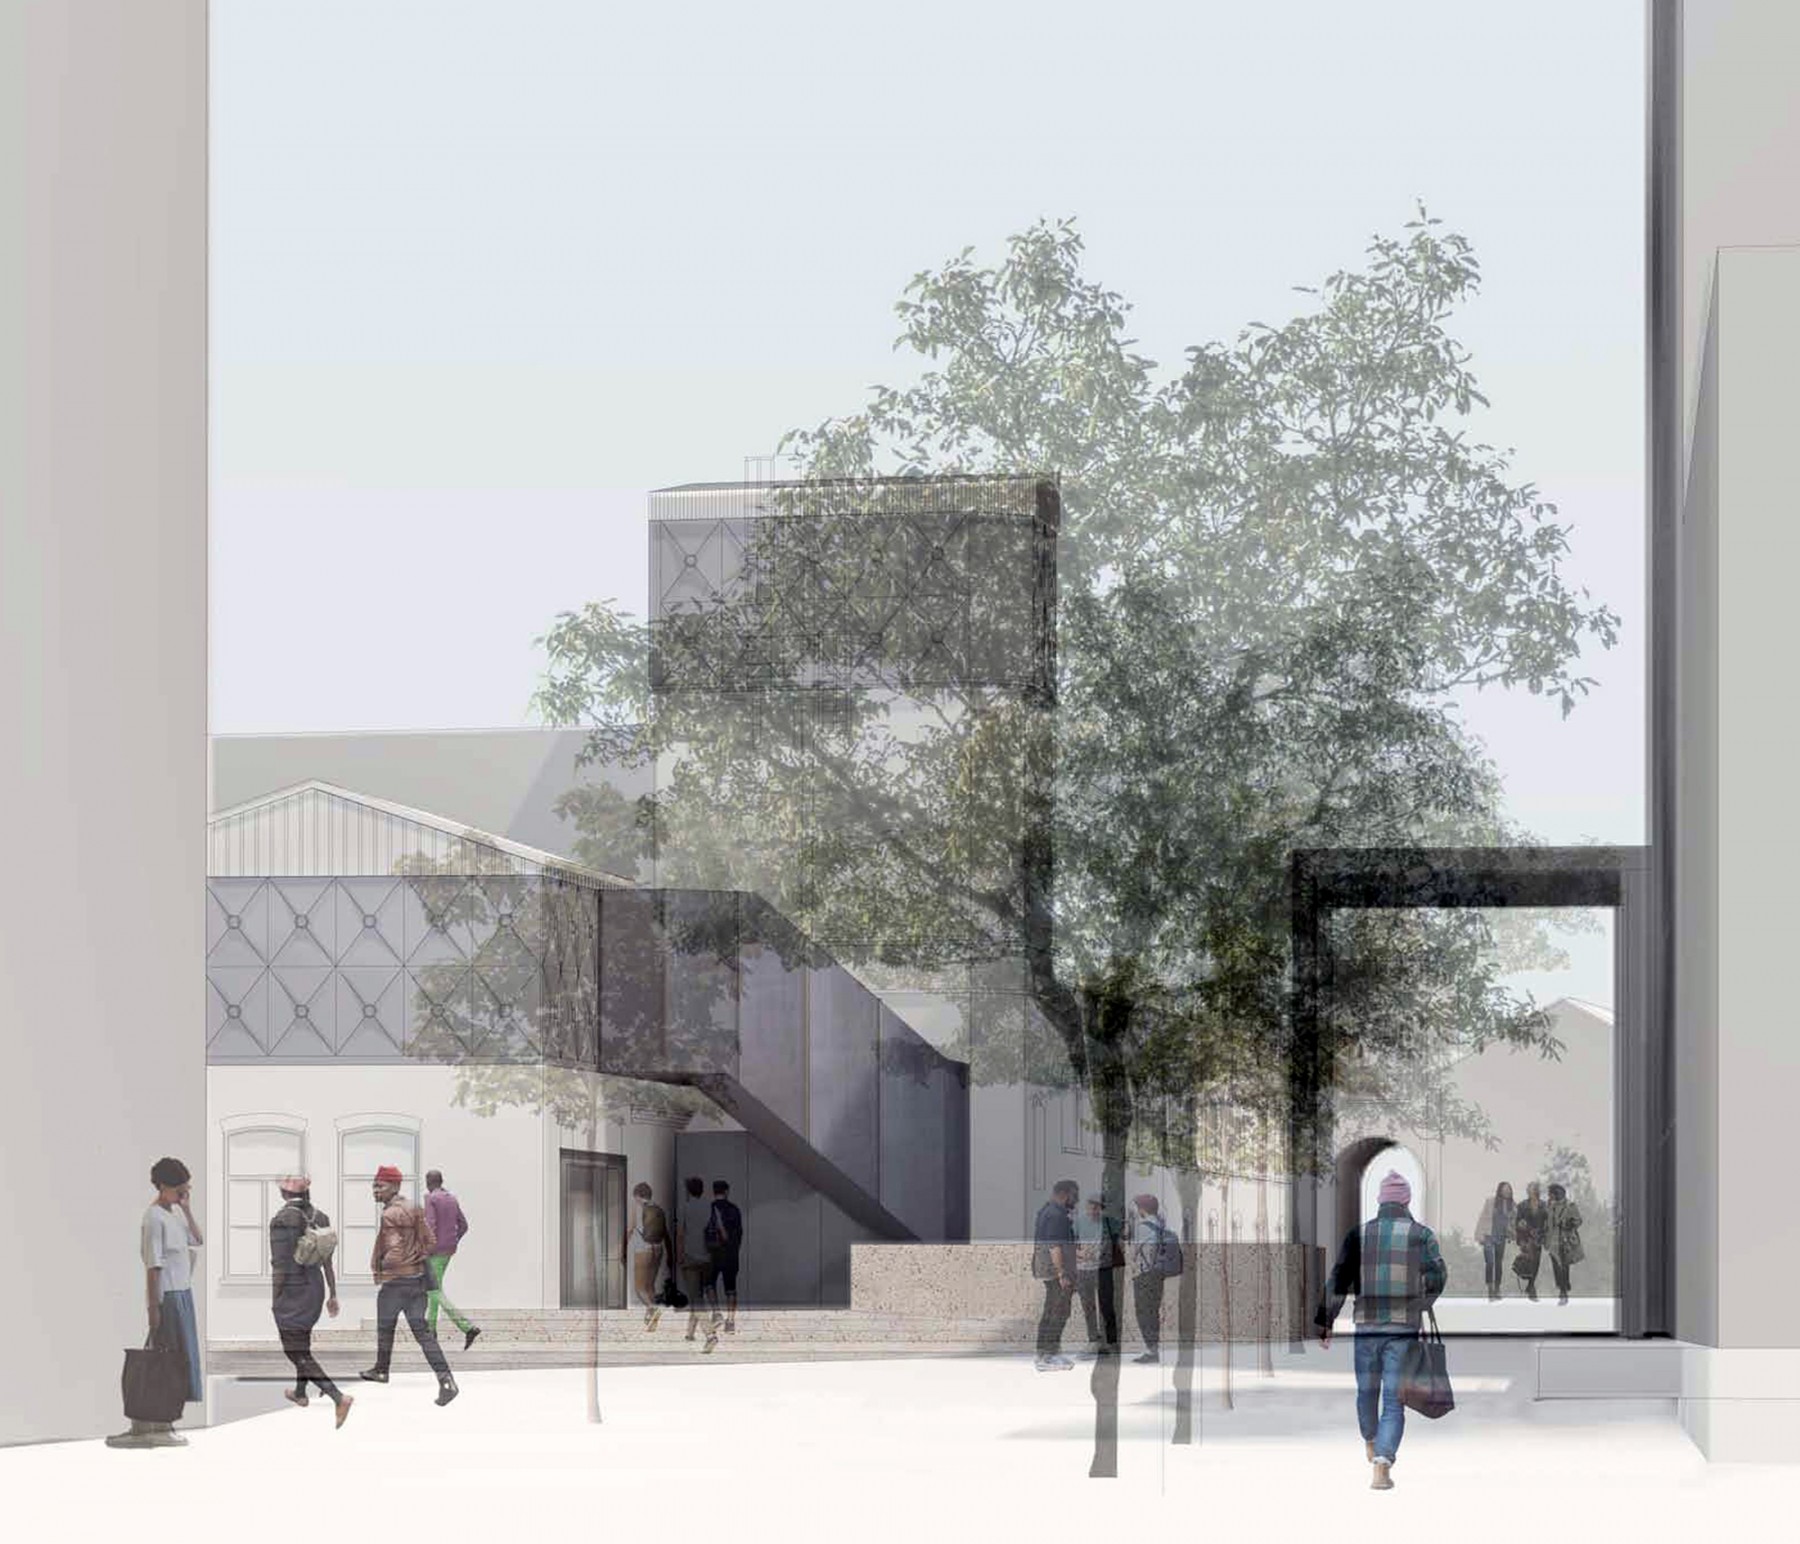 Goldsmiths-competition-gallery-London-contemporary-art-short-list-Jamie-Fobert-architects-proposed public area2